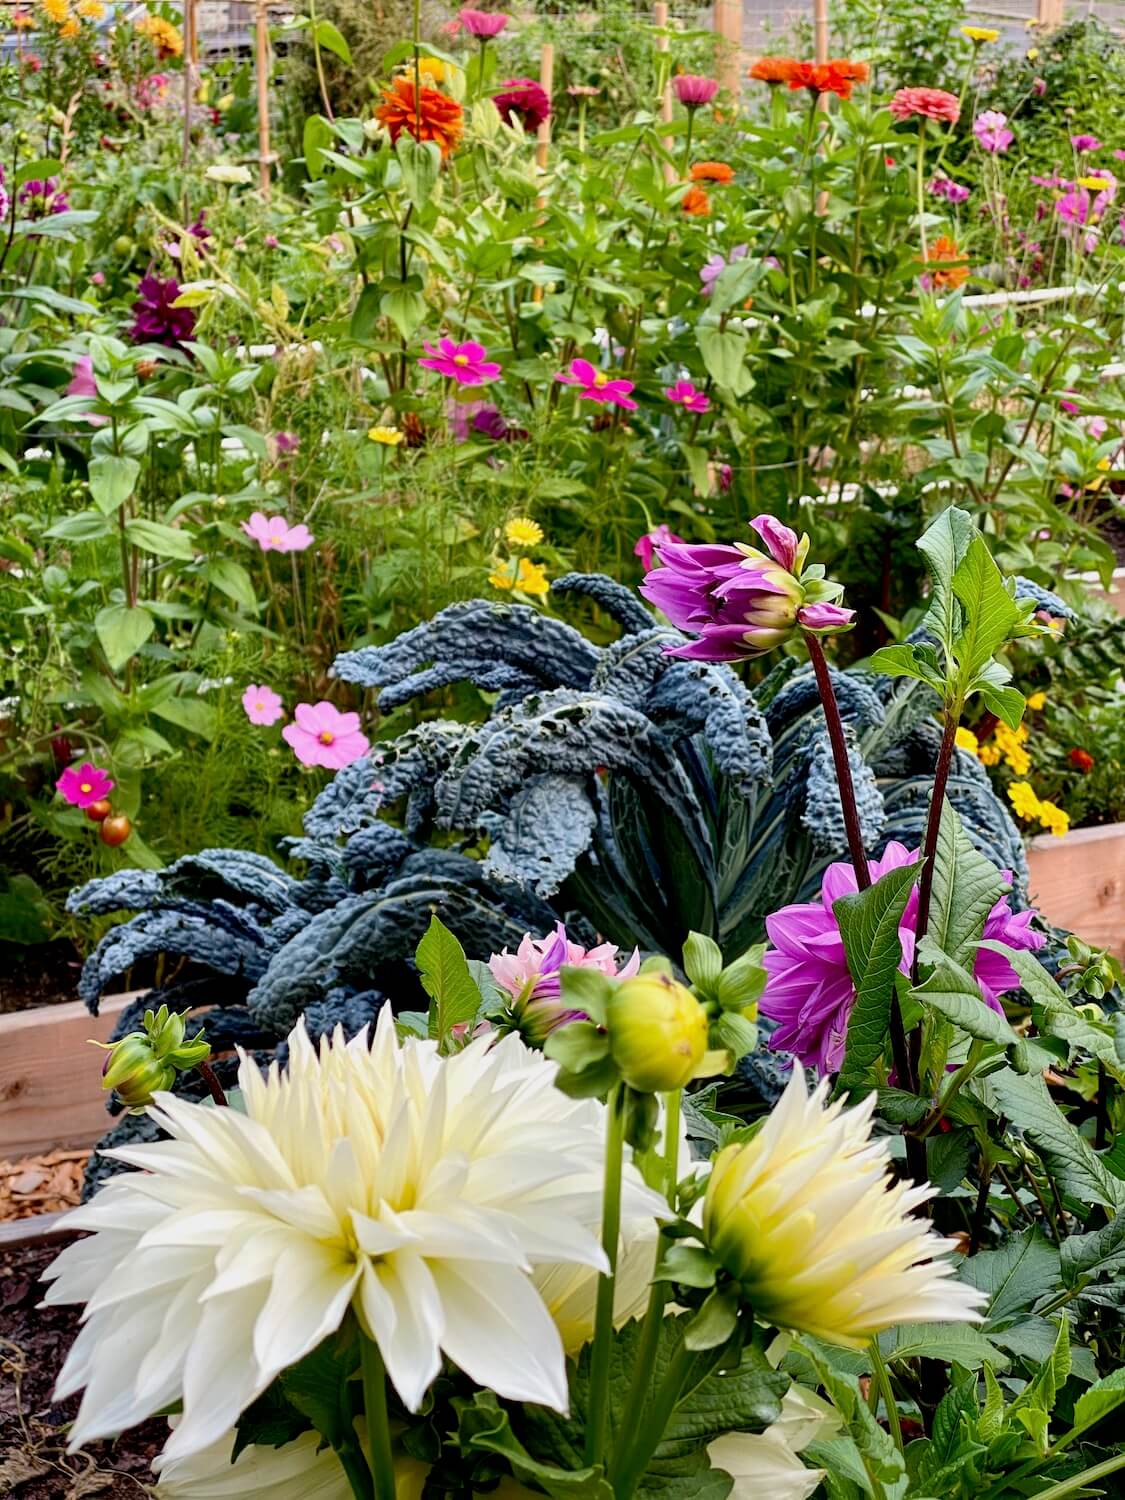 This photo shows the abundance of variety in this P-Patch garden. Up close are fresh white dahlia blooms and then rich green kale lines the edge of the planter box before the next area of zinnia flowers rise up in to pop out color in the background.